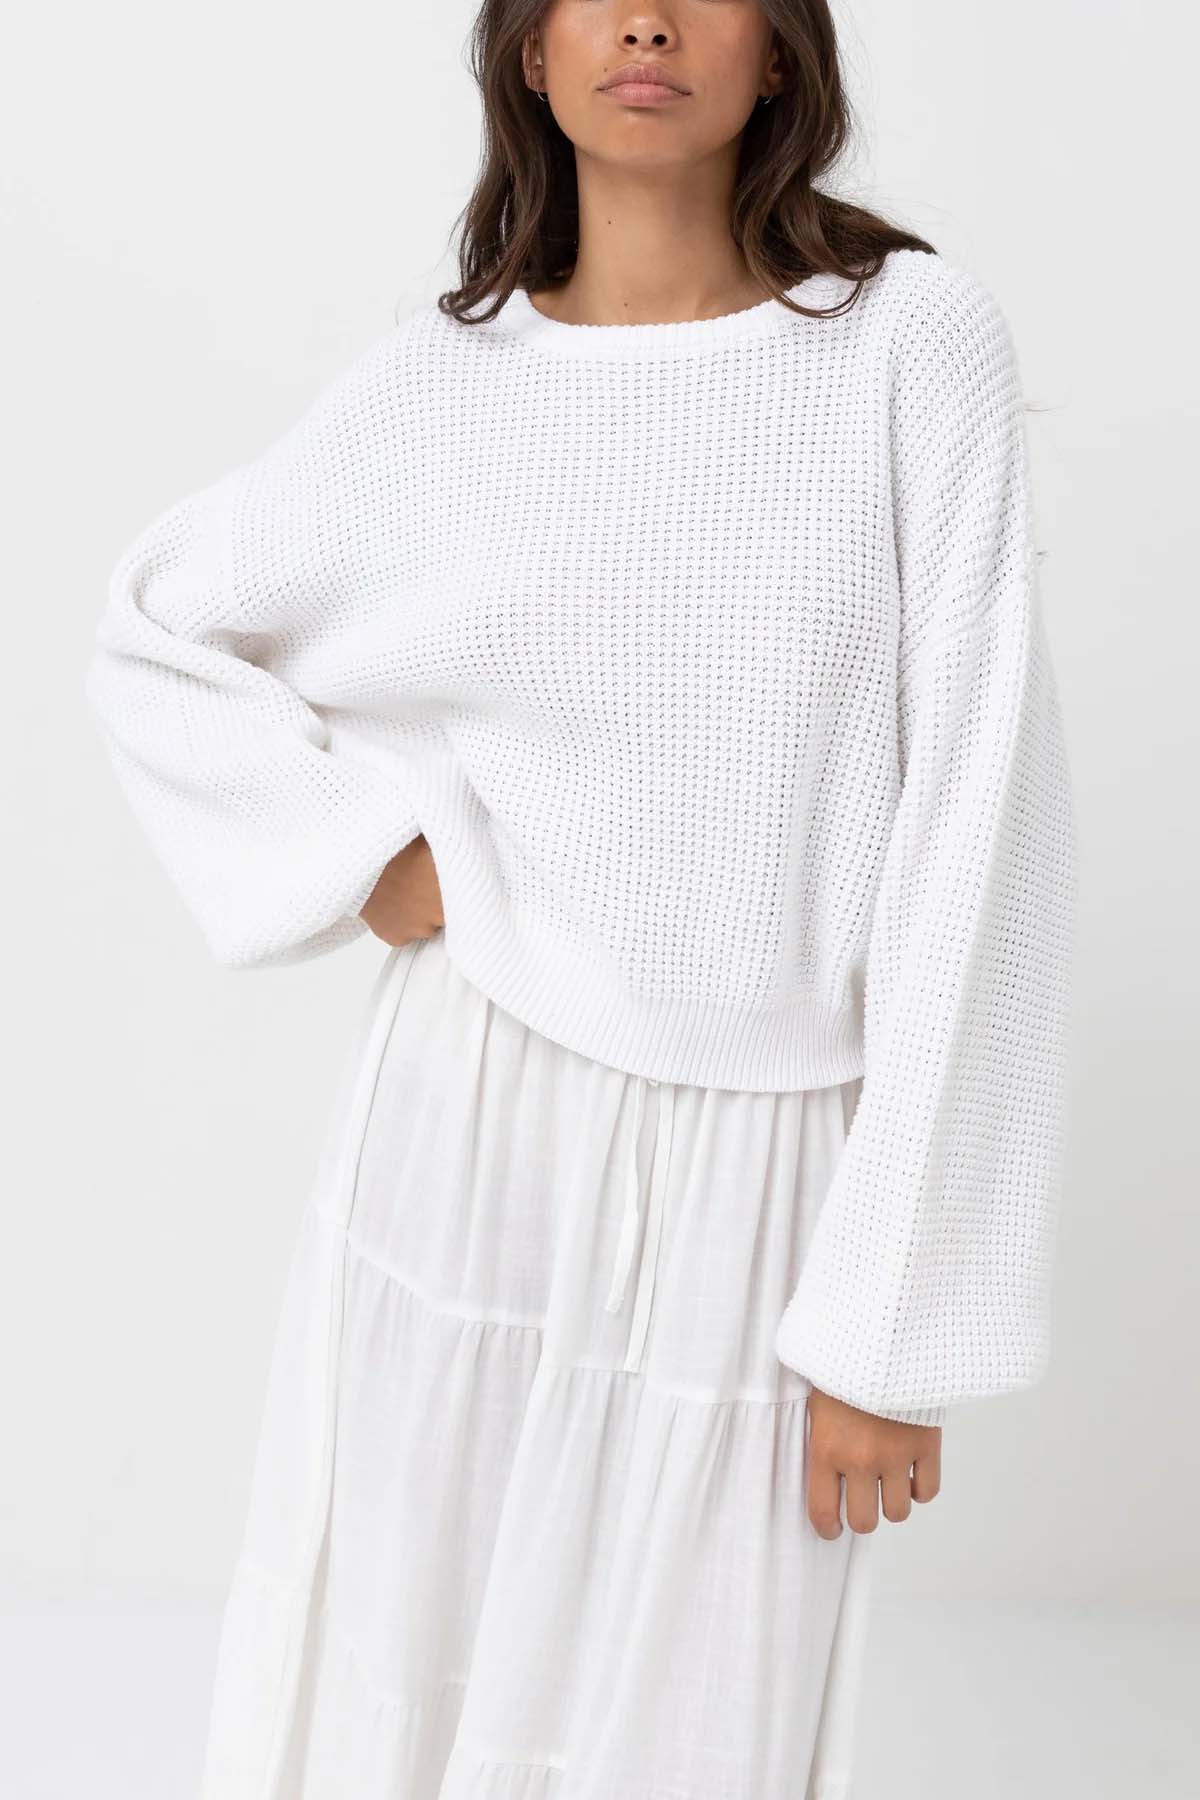 Rhythm - Classic Knit Jumper - White - Front